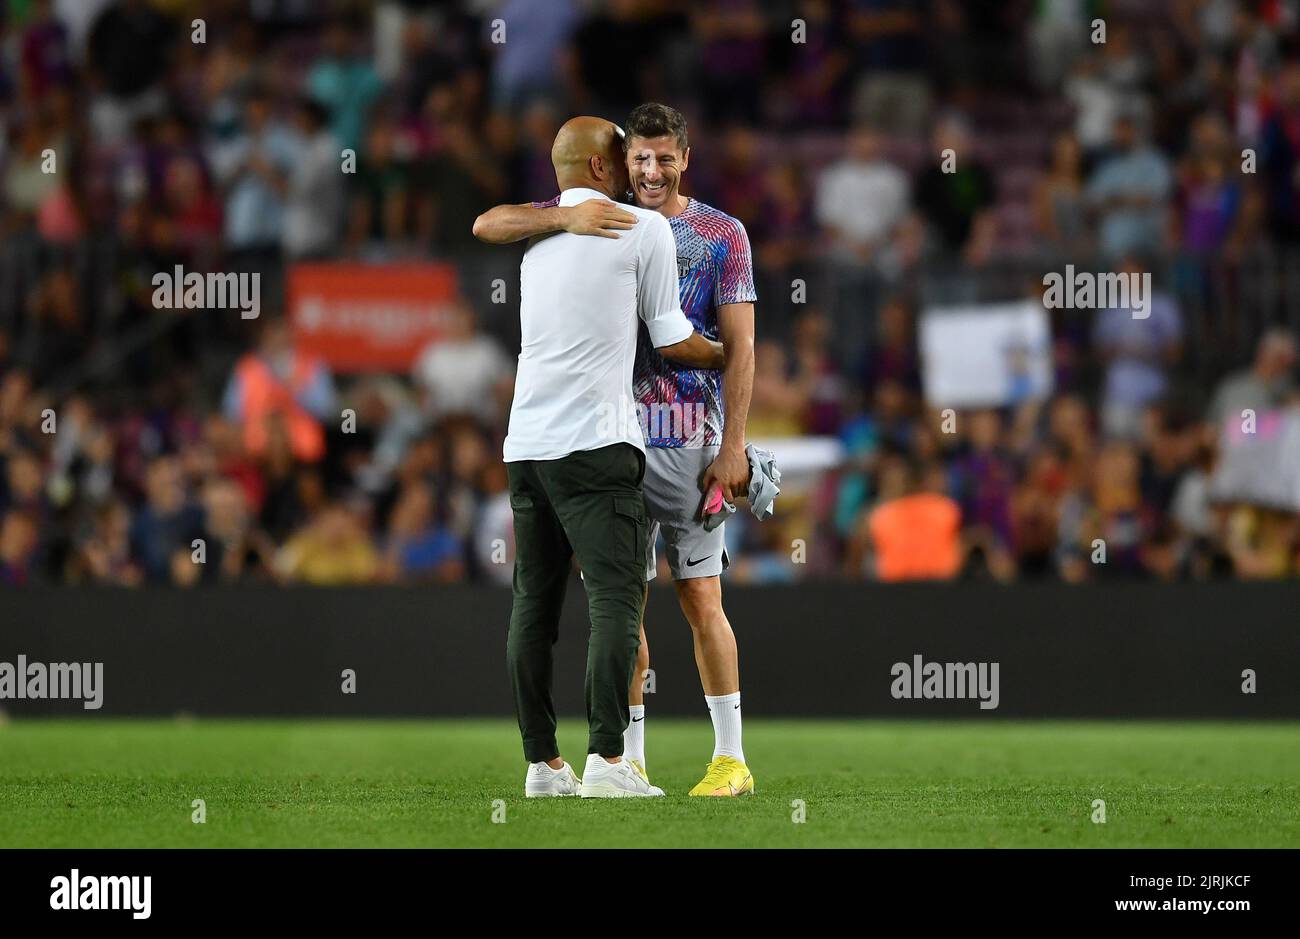 Barcelona,Spain.24 August,2022.  FC Barcelona v Manchester City  Pep Guardiola (head coach) of Manchester City and Robert Lewandowski (9) of FC Barcelona at the end of the friendly match between FC Barcelona and Manchester City in support of the cause of former goalkeeper and coach Juan Carlos Unzué, who was diagnosed with ALS (amyotrophic lateral sclerosis) more than two years ago at Spotify Camp Nou Stadium in Barcelona, Spain. Stock Photo